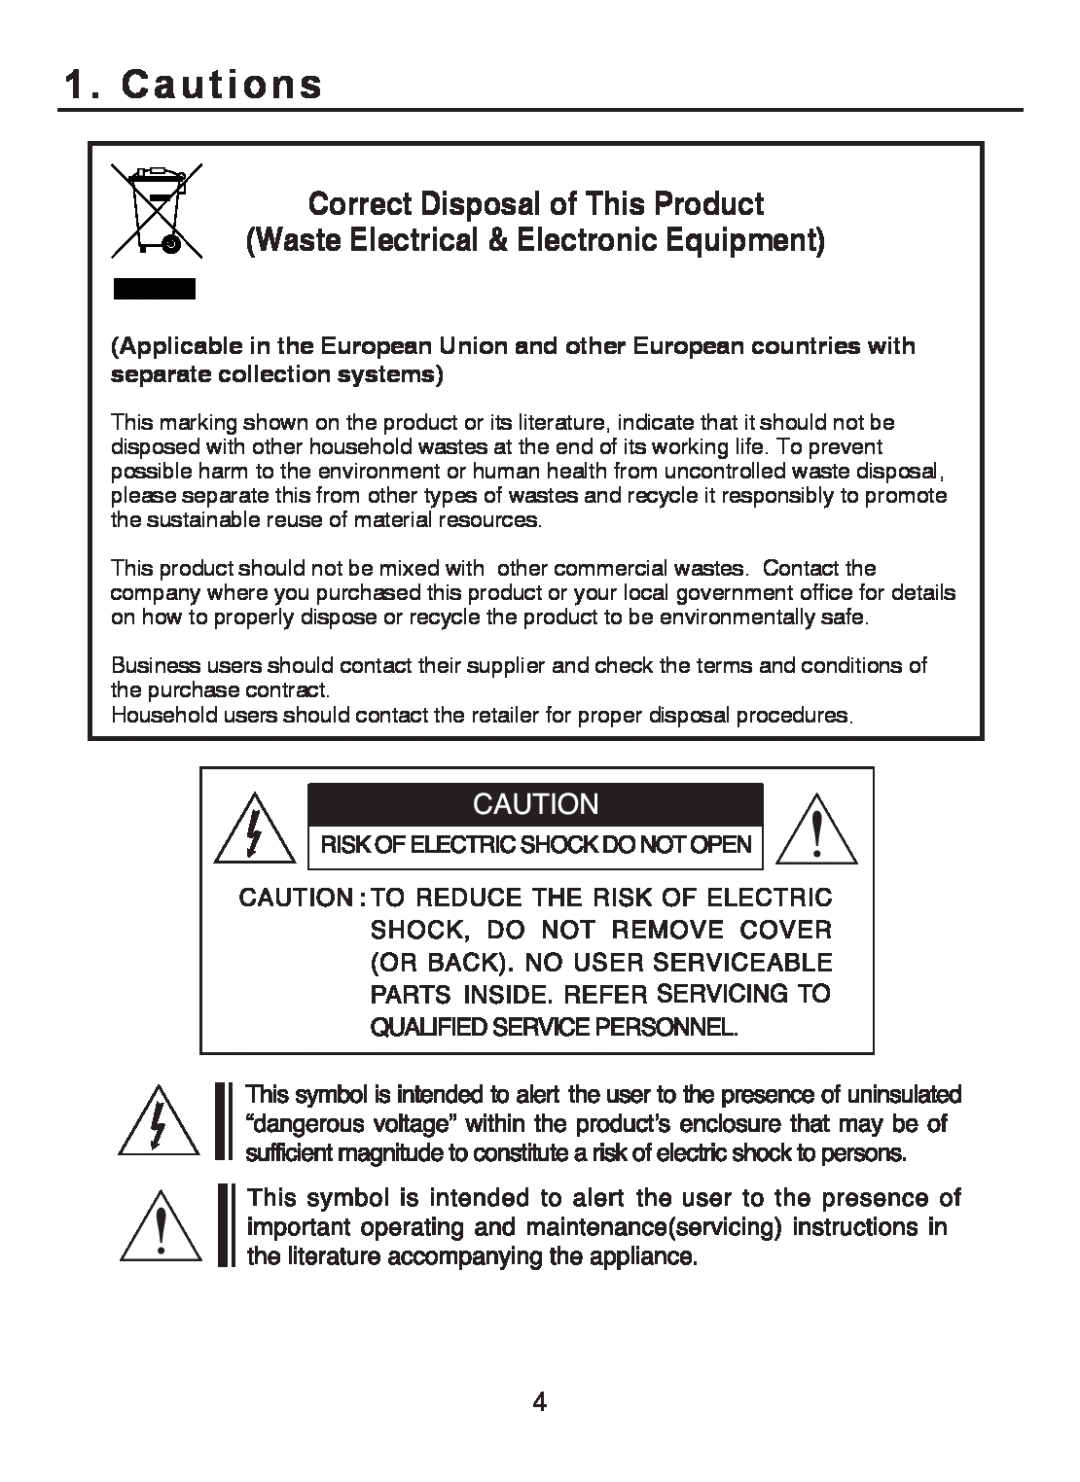 EverFocus EZ-PLATECAM2 operation manual Correct Disposal of This Product, Waste Electrical & Electronic Equipment, Cautions 